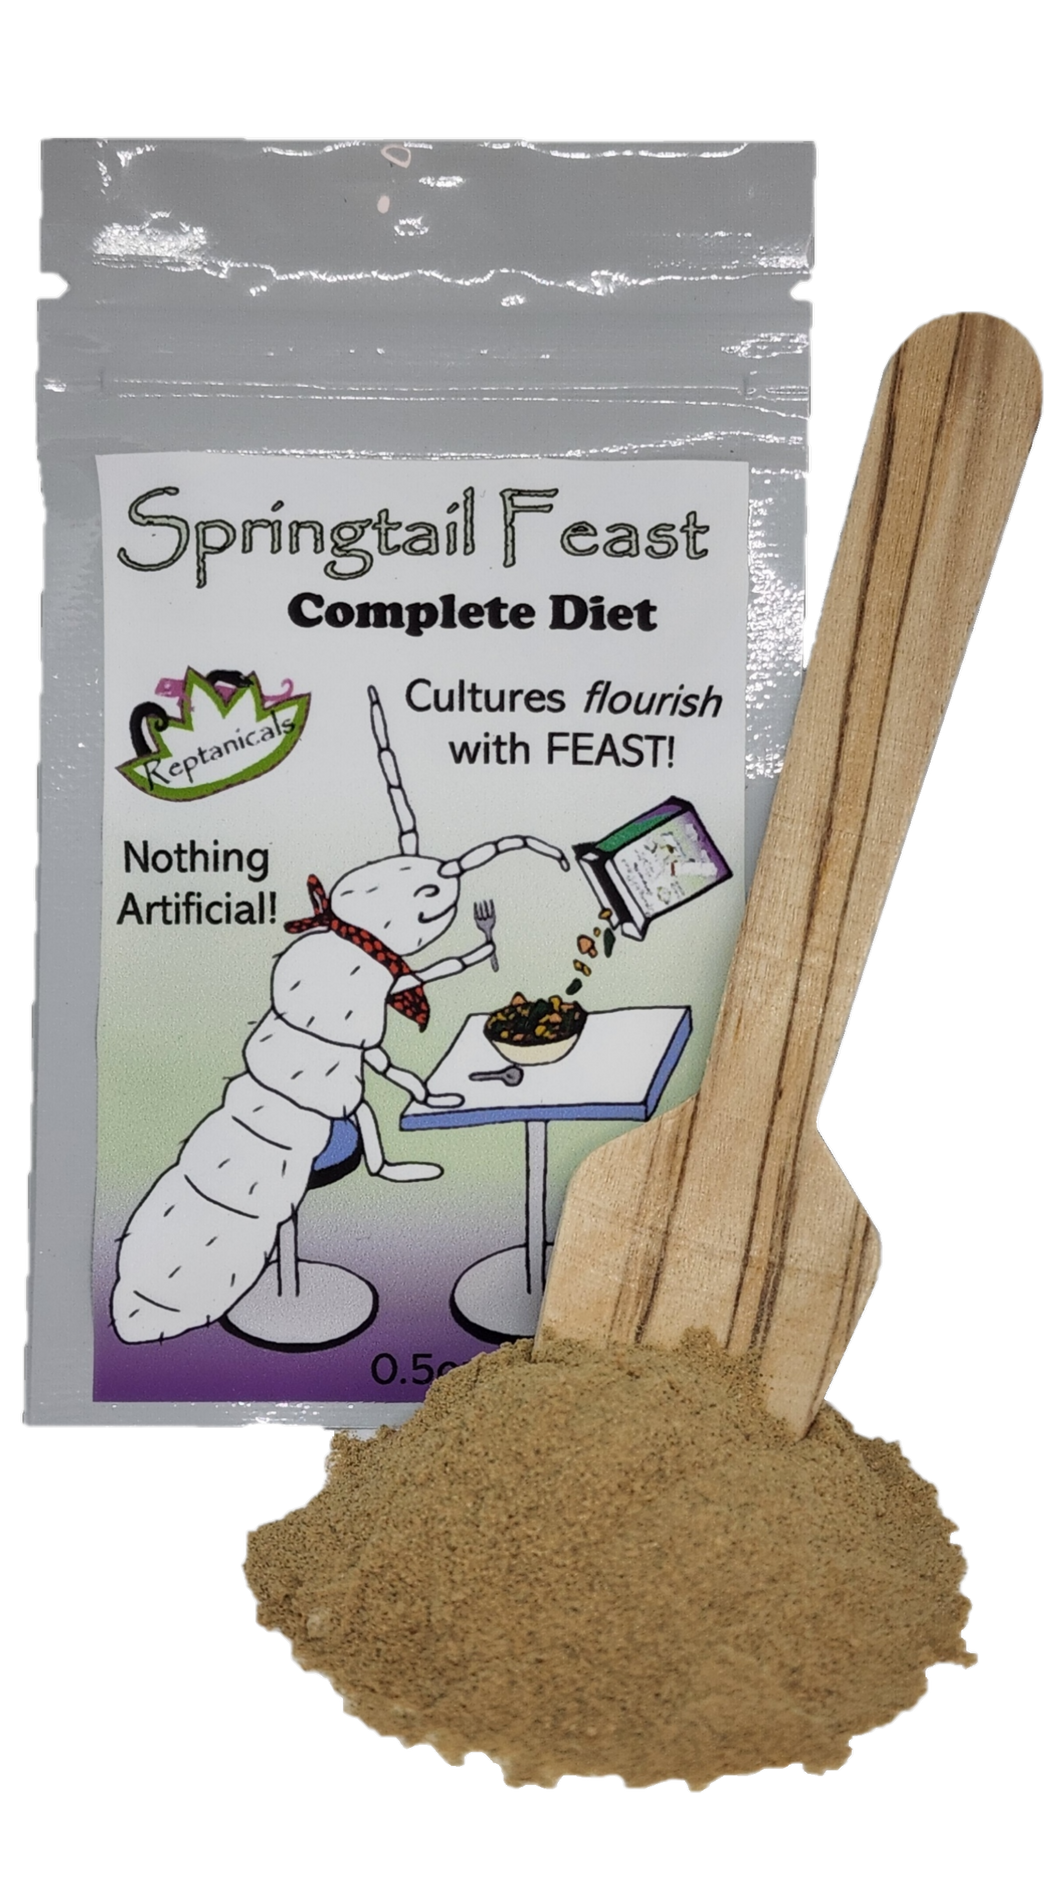 Springtail Feast Food from reptanicals